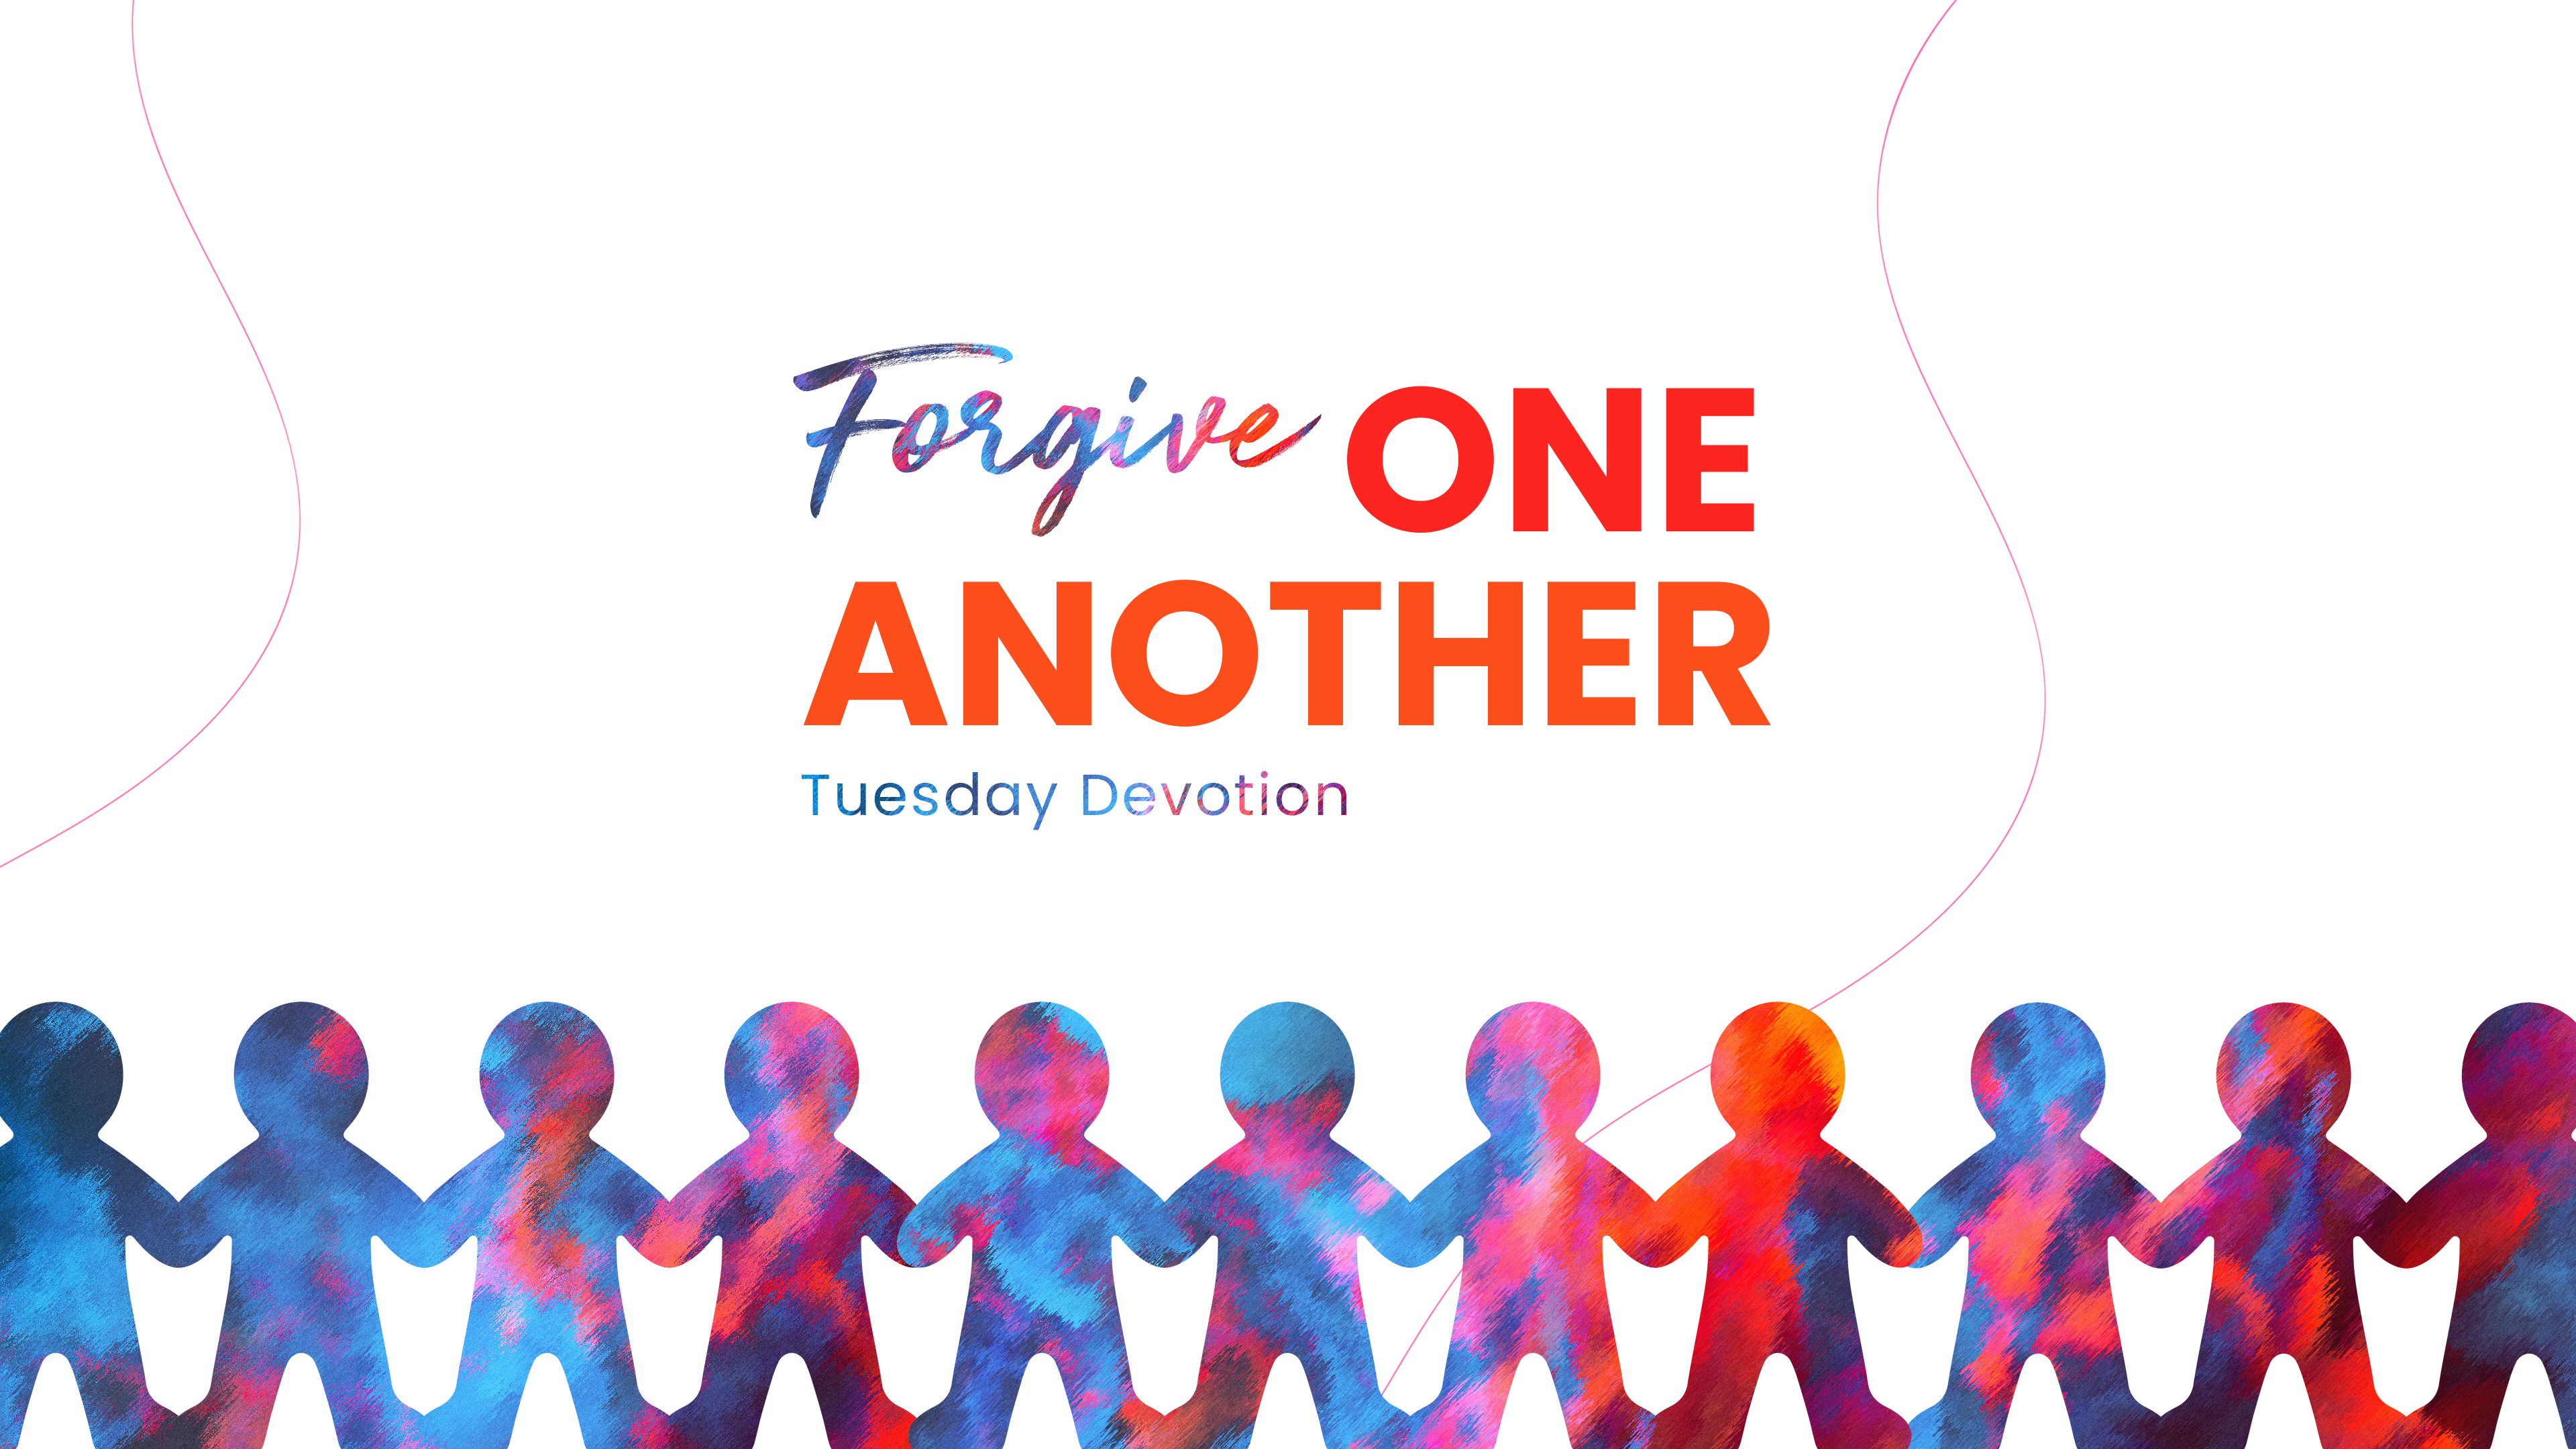 Tuesday Devotion: Forgive One Another